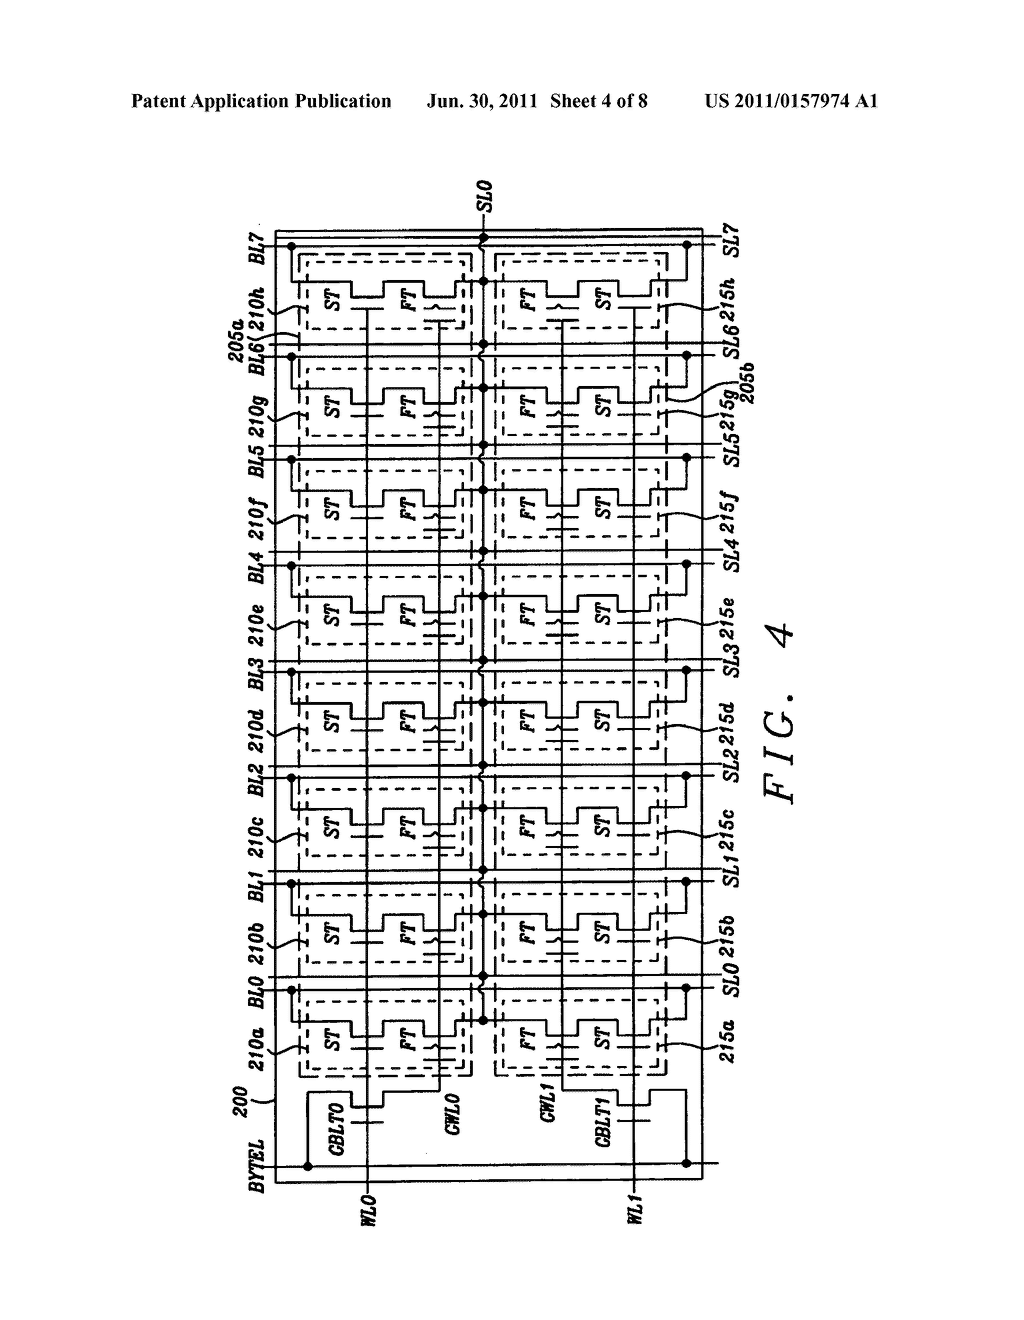 Novel cell array for highly-scalable , byte-alterable, two-transistor     FLOTOX EEPROM non-volatile memory - diagram, schematic, and image 05